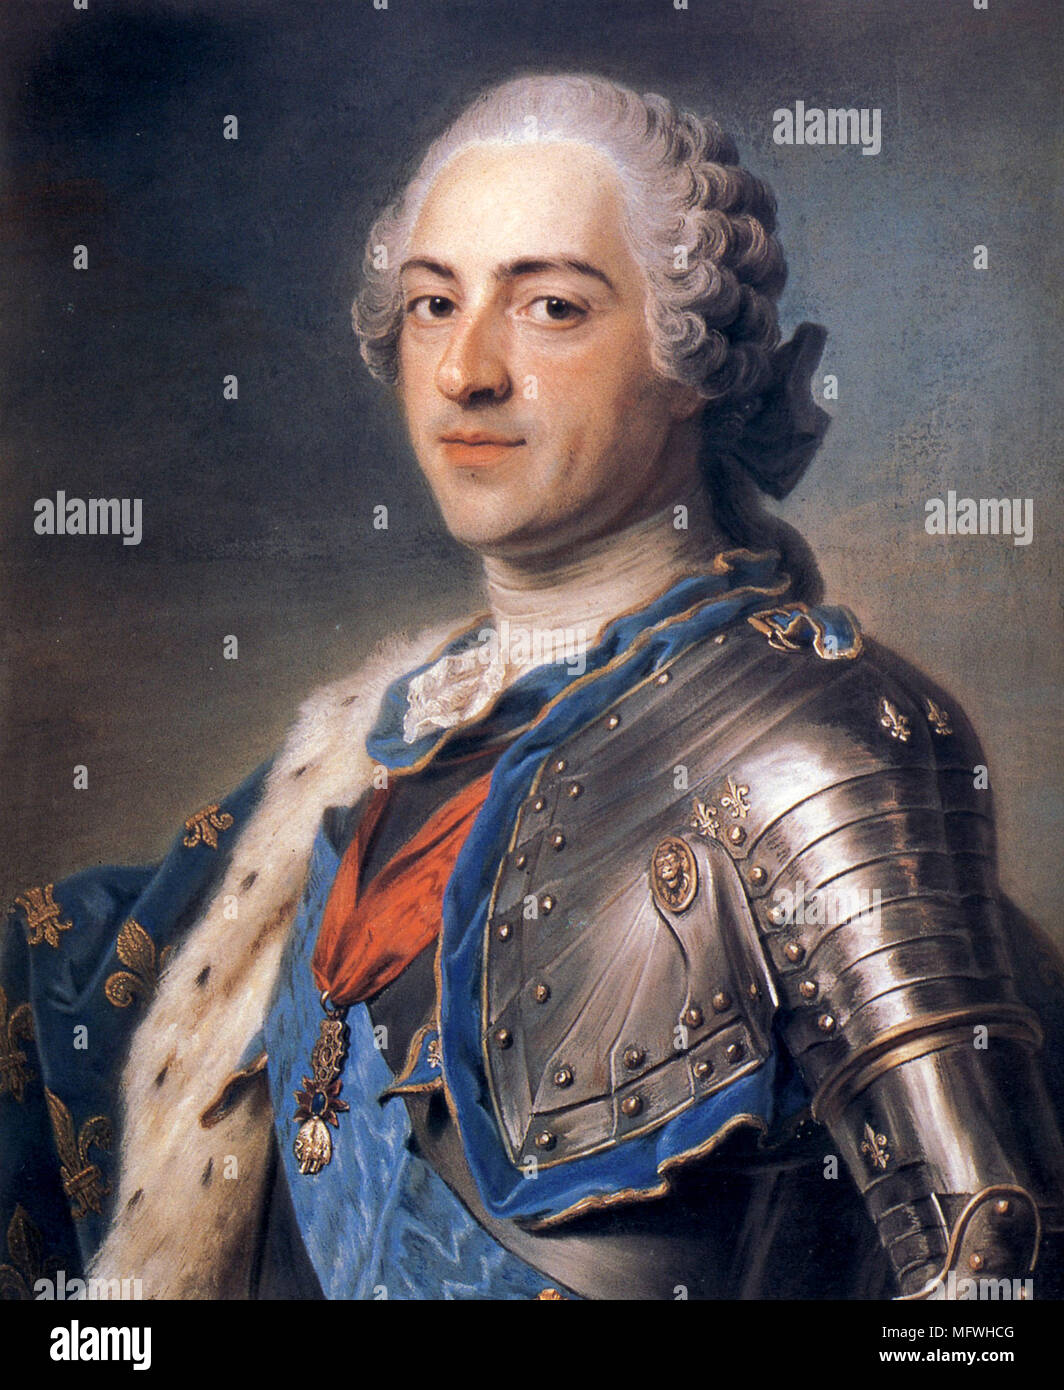 Louis XV , Louis XV (15 February 1710 – 10 May 1774), known as Louis the Beloved, monarch of the House of Bourbon who ruled as King of France from 1715 until 1774. Portrait by Maurice-Quentin de La Tour Stock Photo